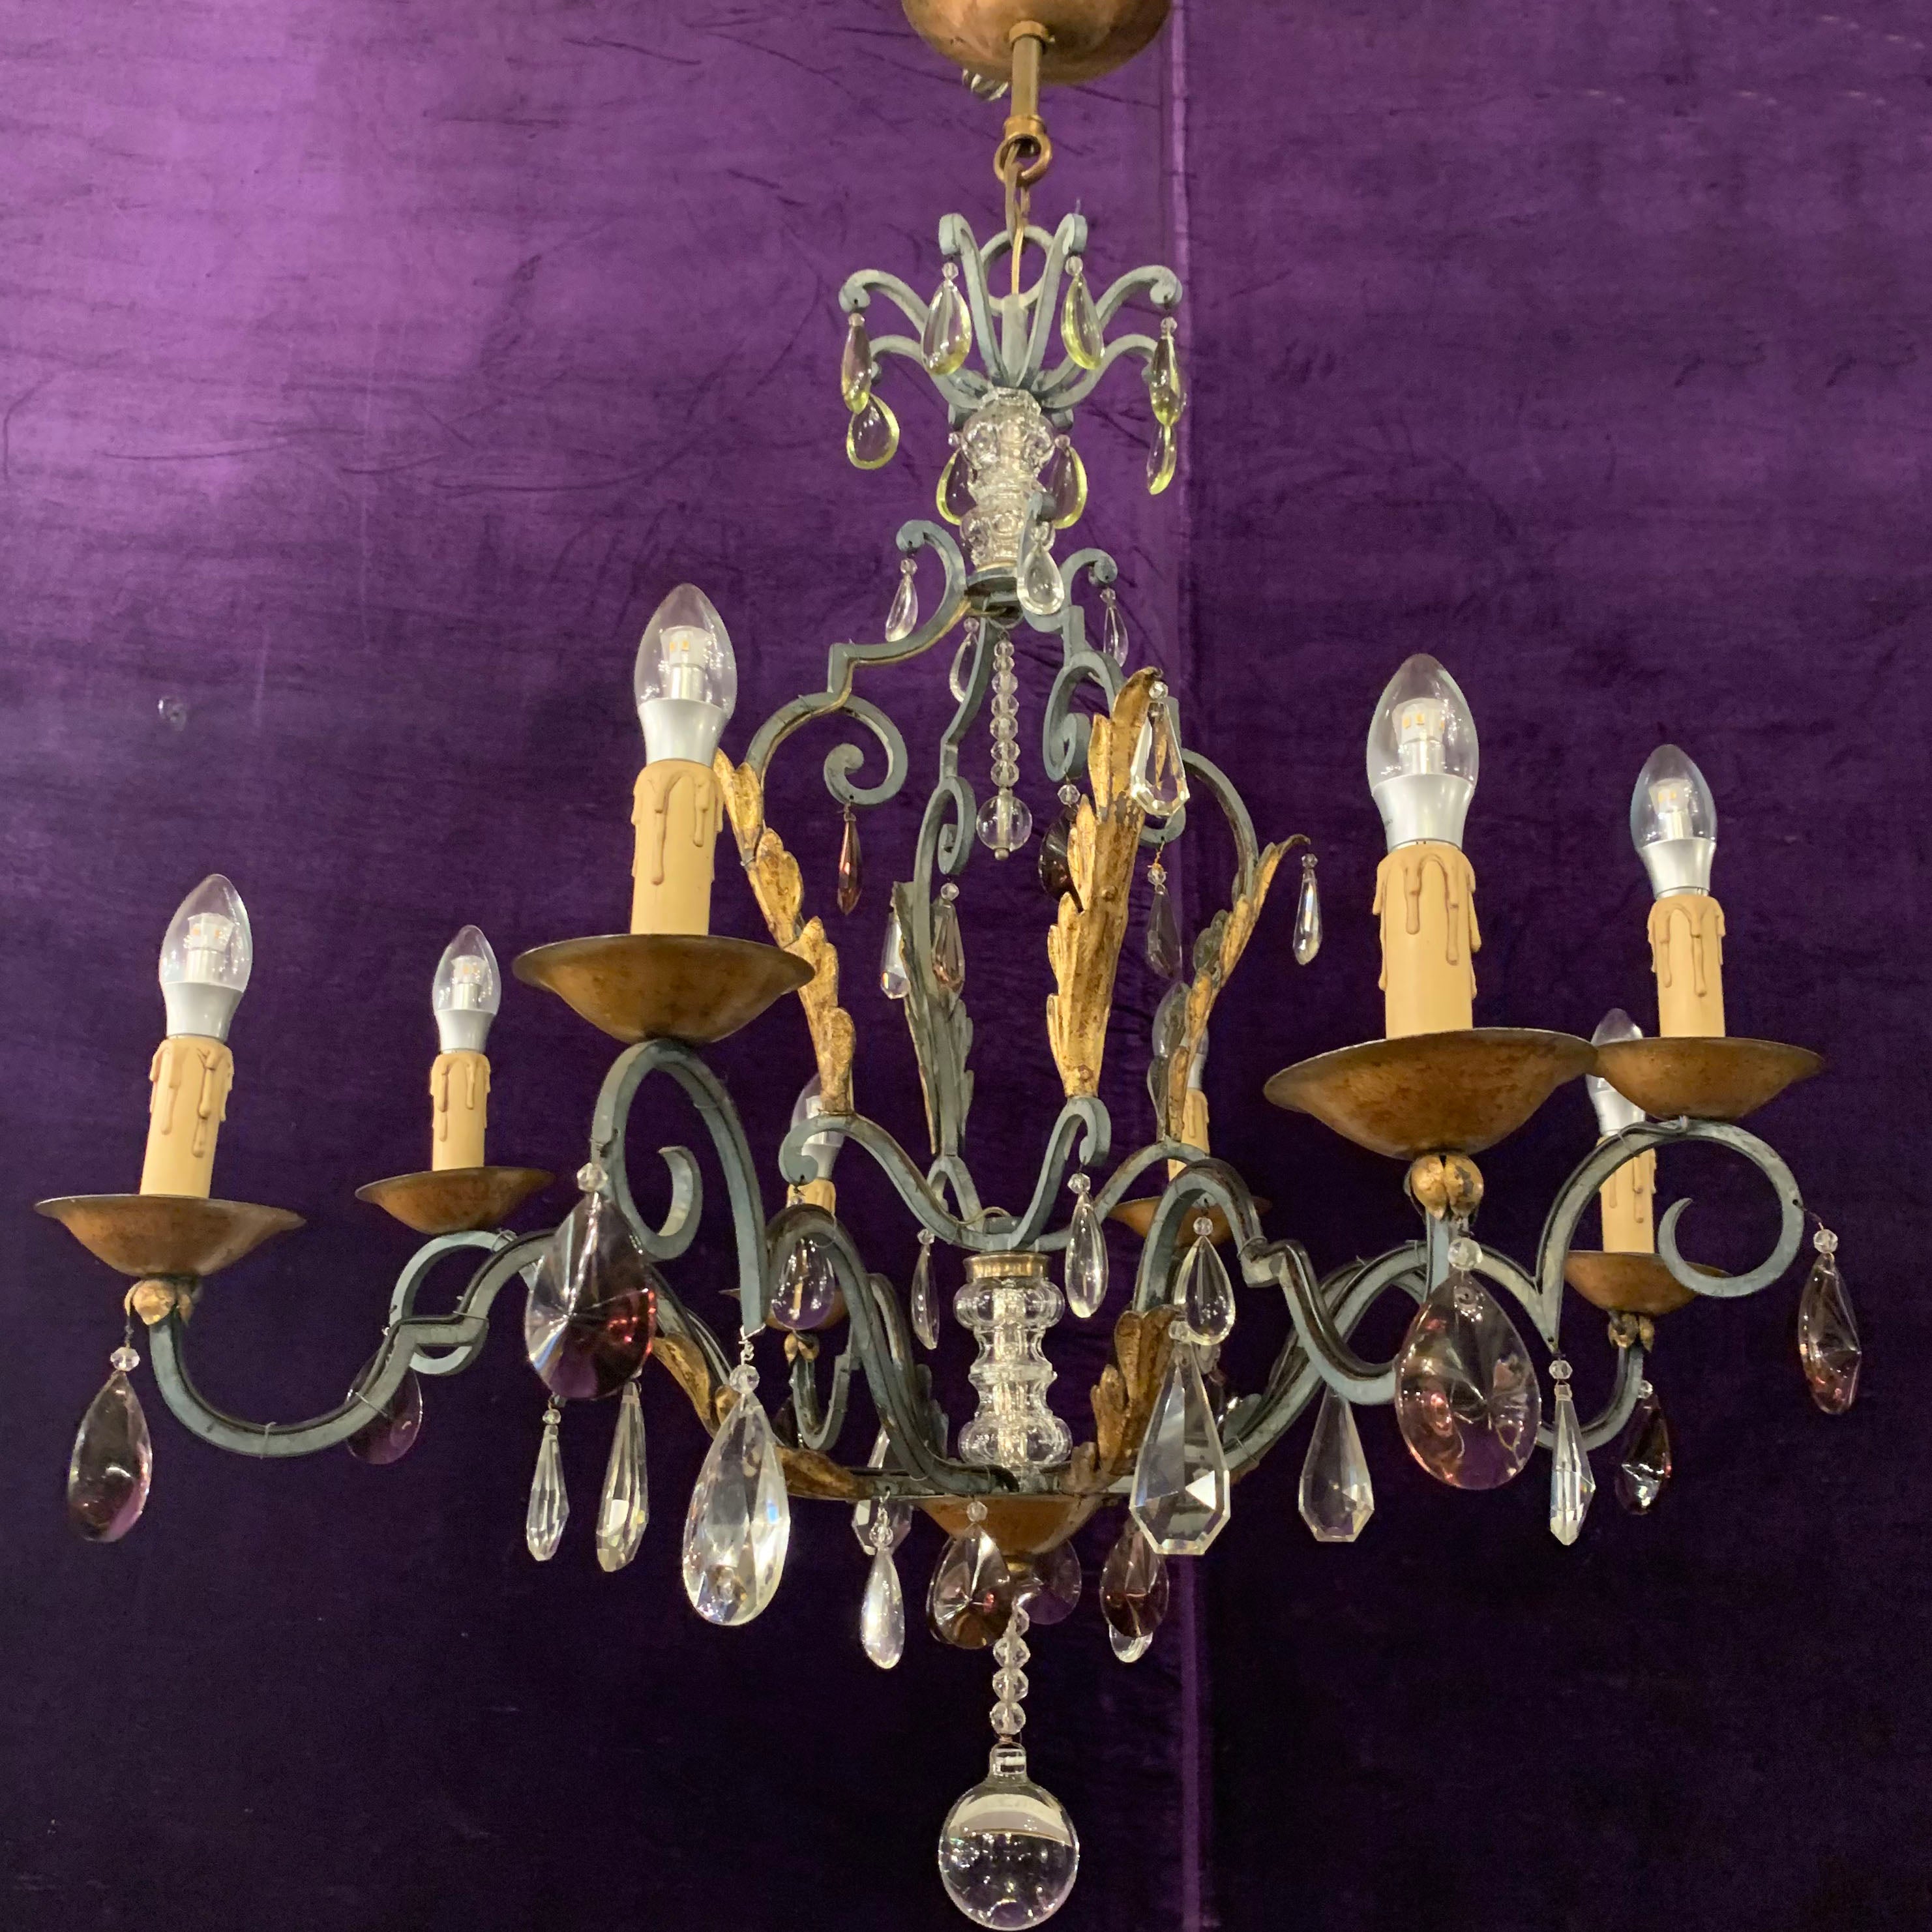 Wrought Iron Chandelier with Gold Leaf detail and Purple Crystals